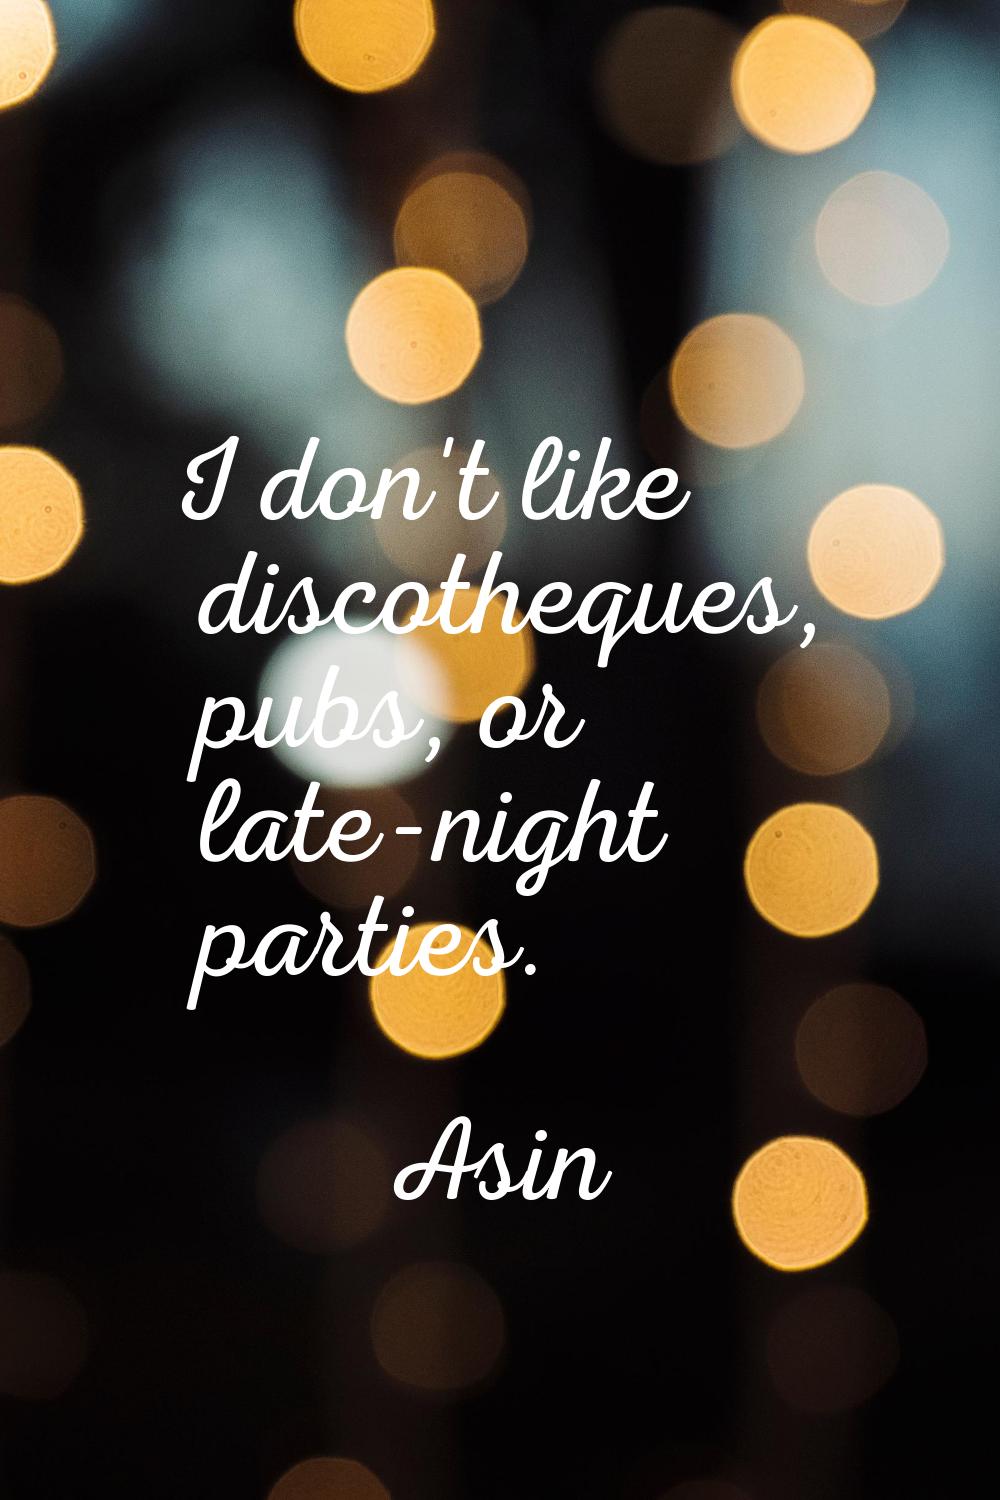 I don't like discotheques, pubs, or late-night parties.